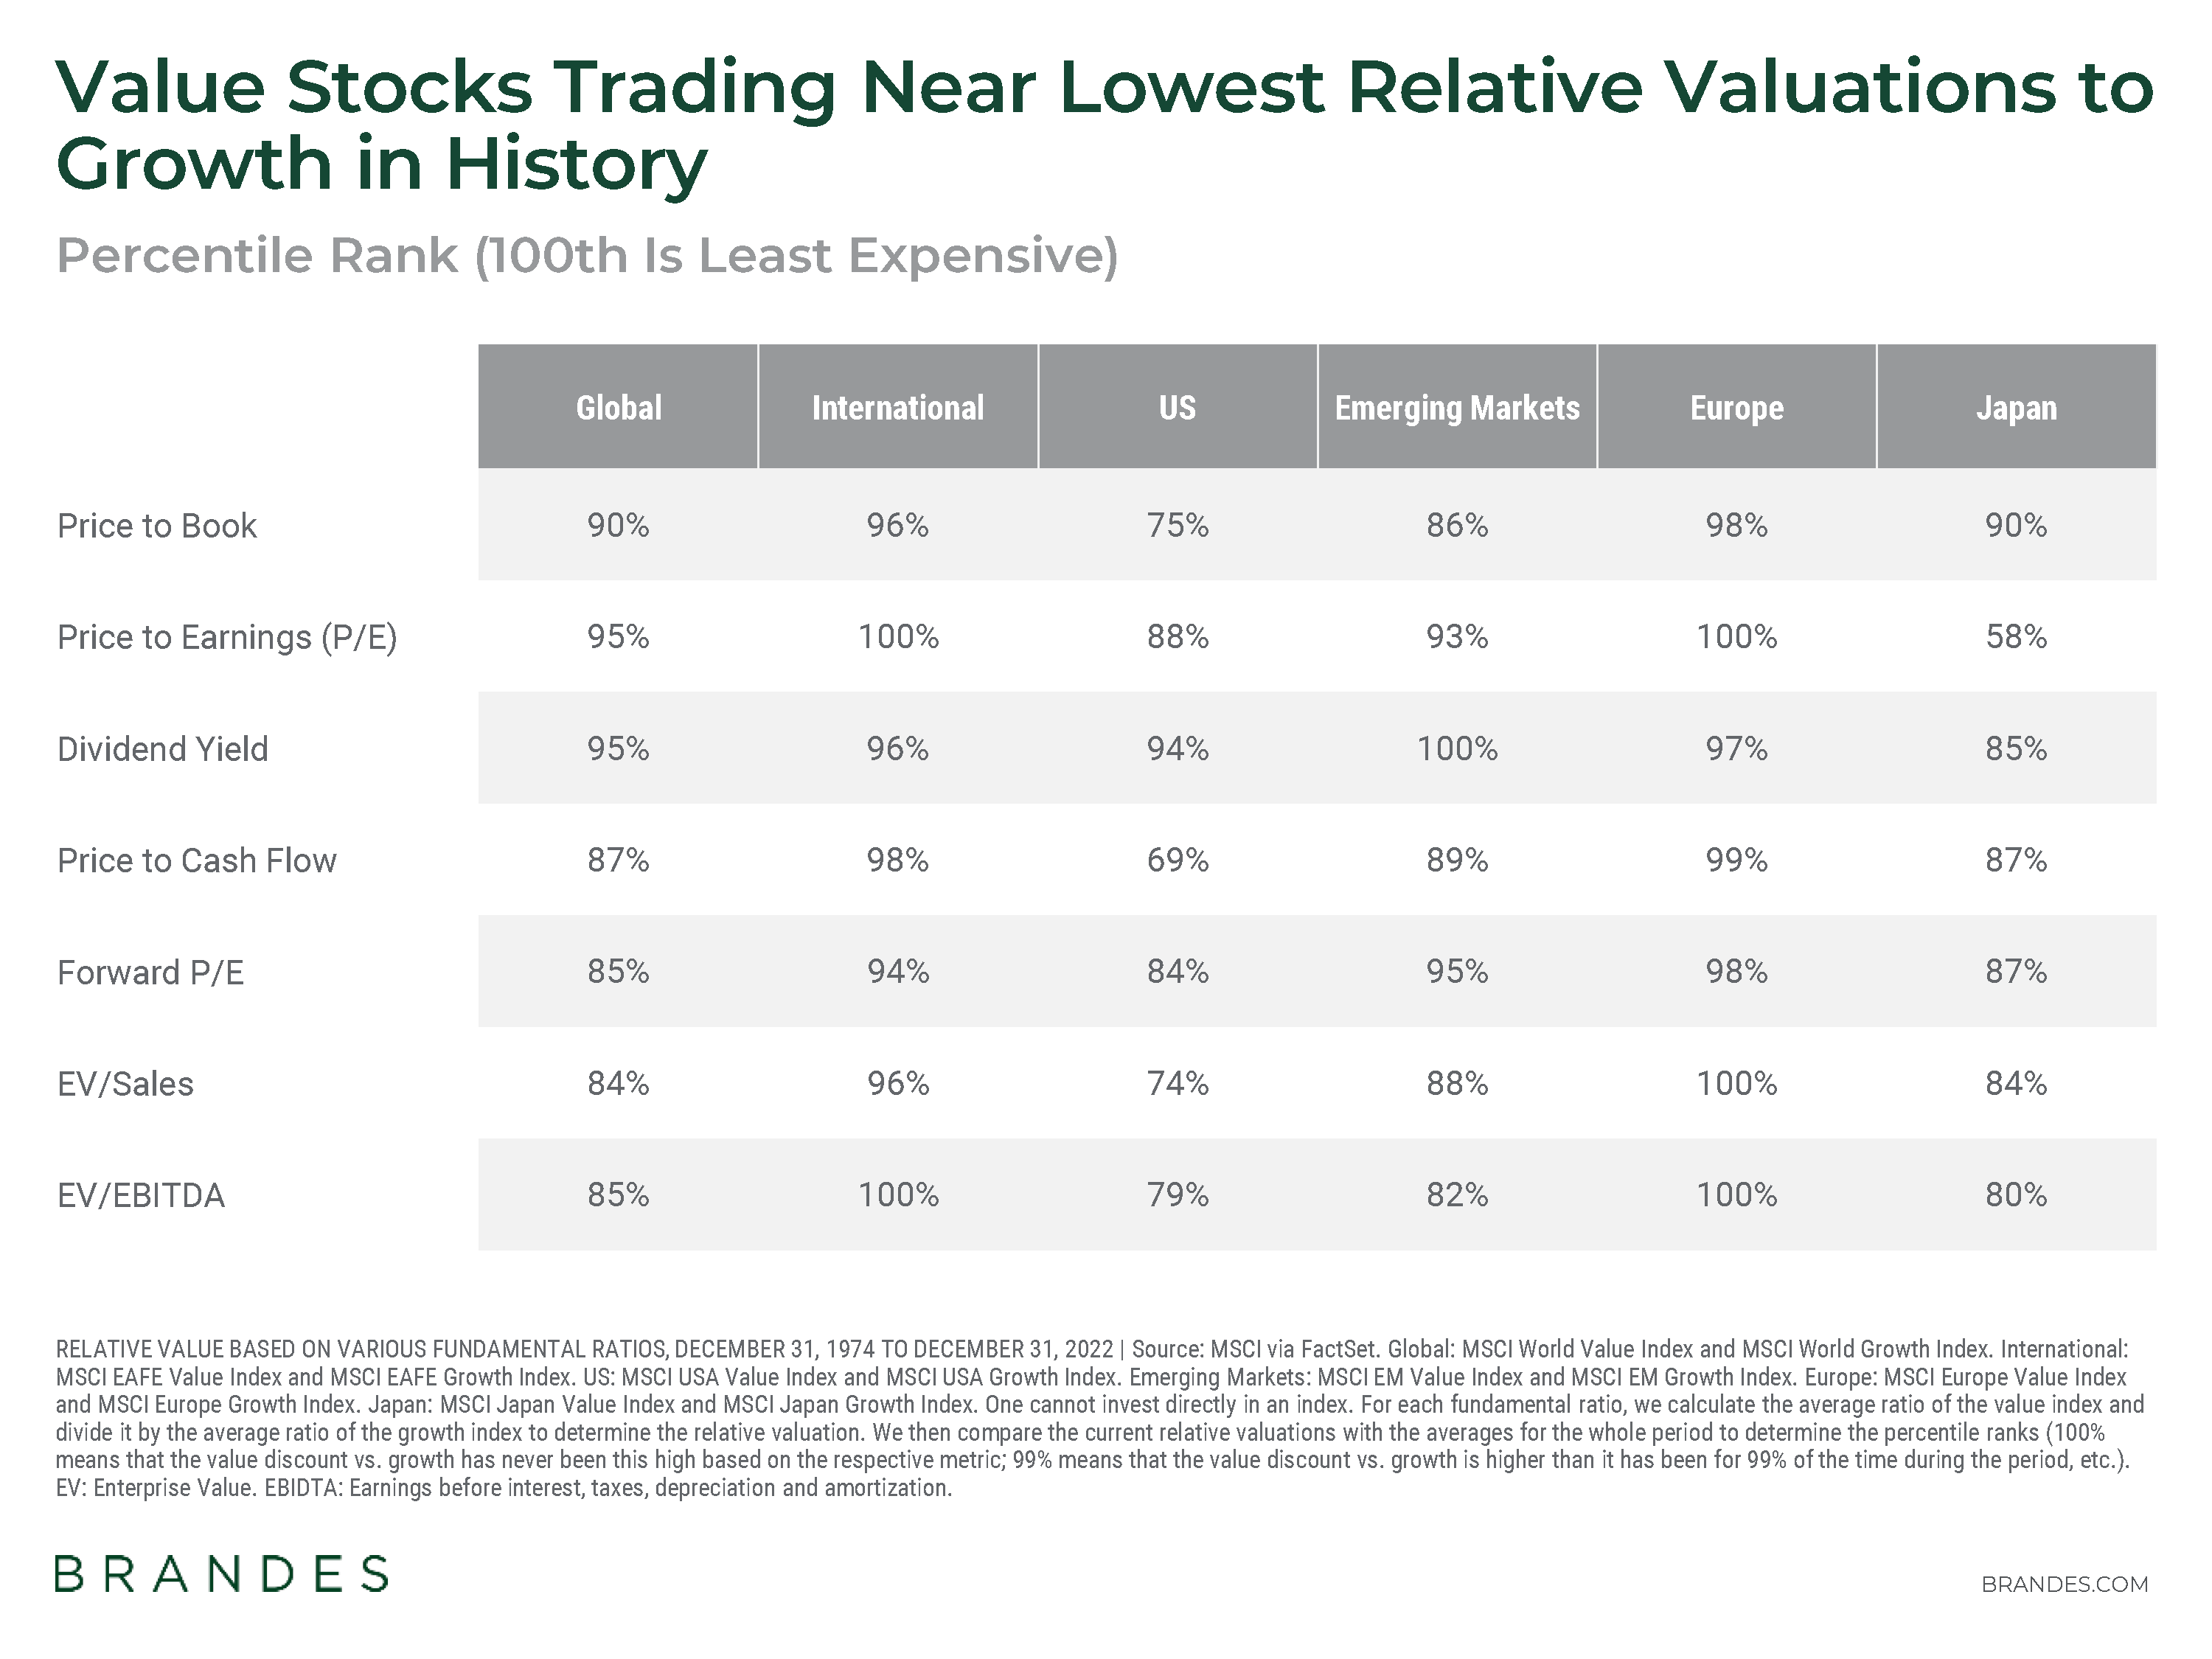 Value Stocks Trading Near Lowest Relative Valuations to Growth in History